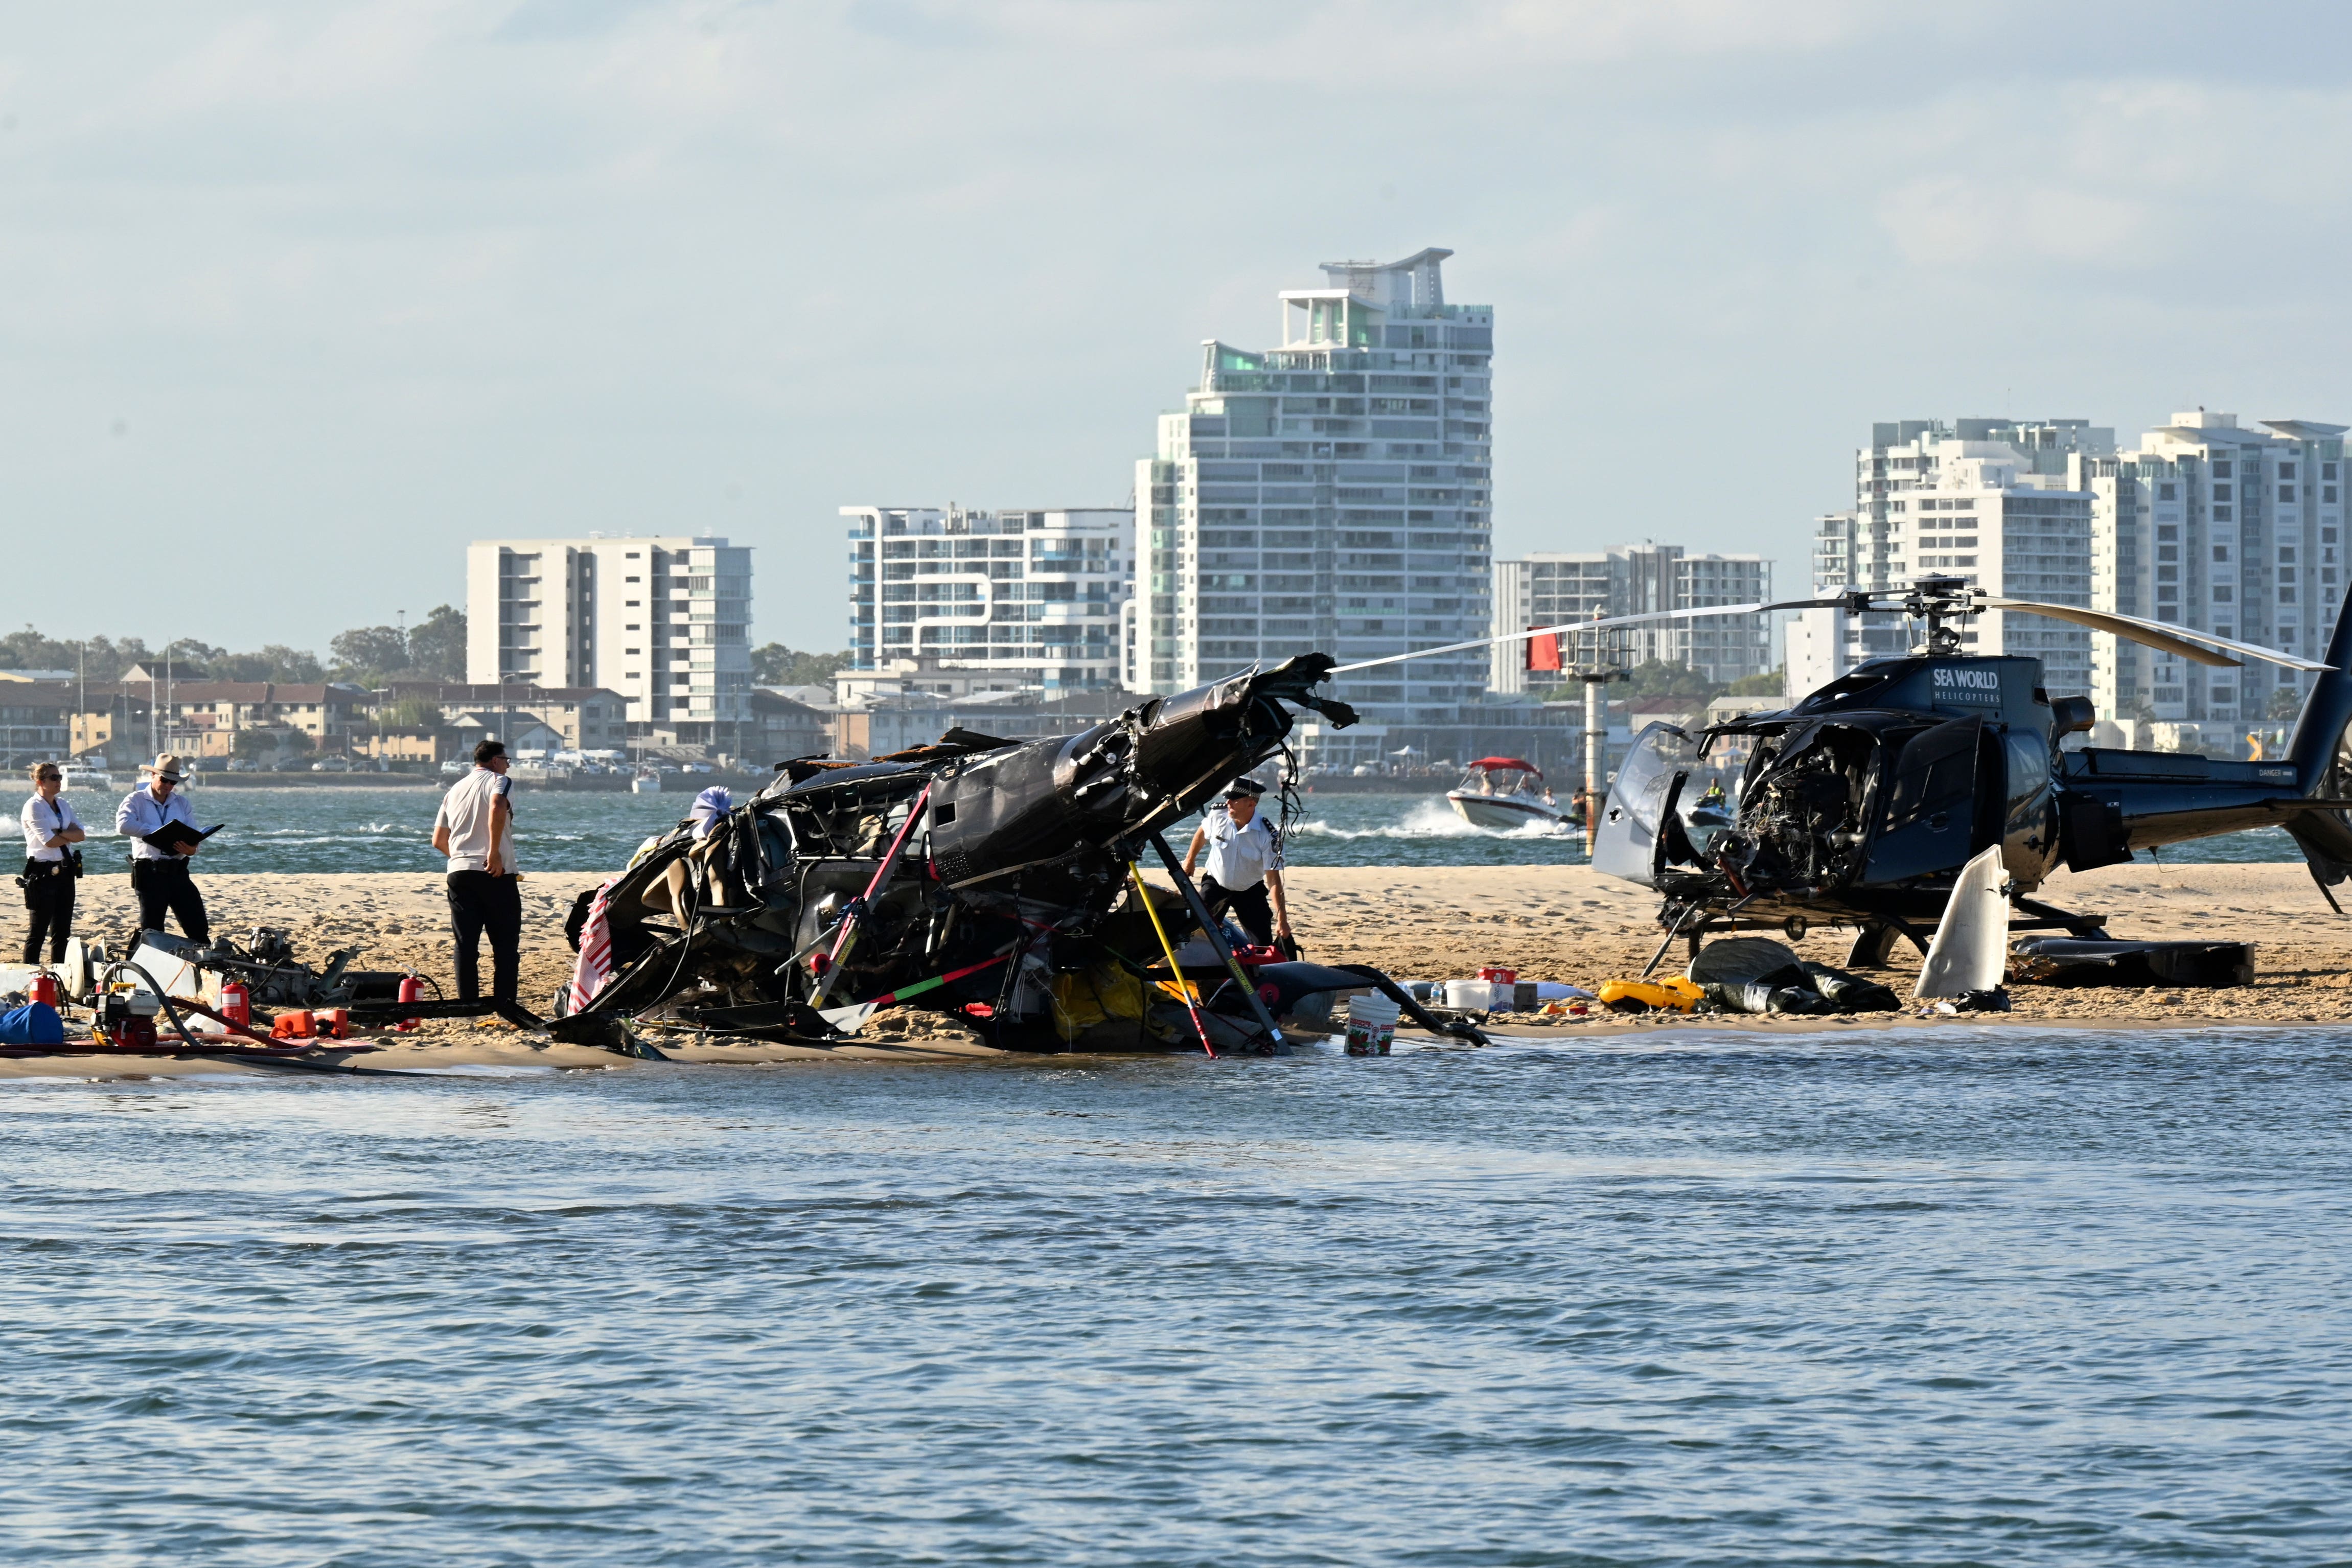 The Australian Transport Safety Bureau (ATSB) has released a preliminary report in relation to a mid-air crash between two sightseeing helicopters on the Gold Coast